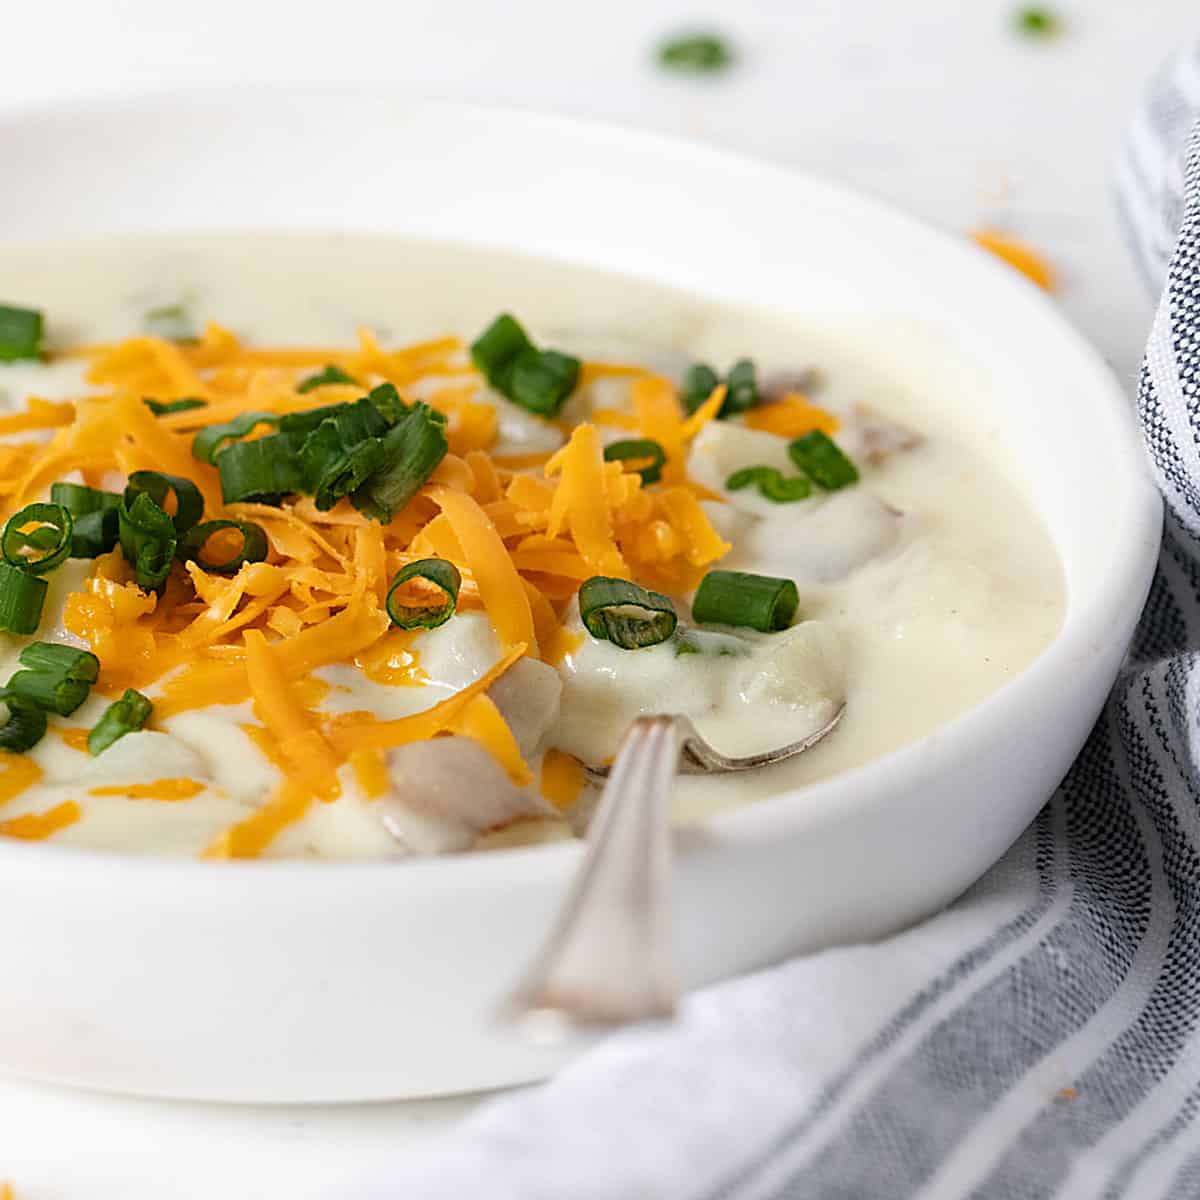 Quick Loaded Potato Soup - Seasons and Suppers